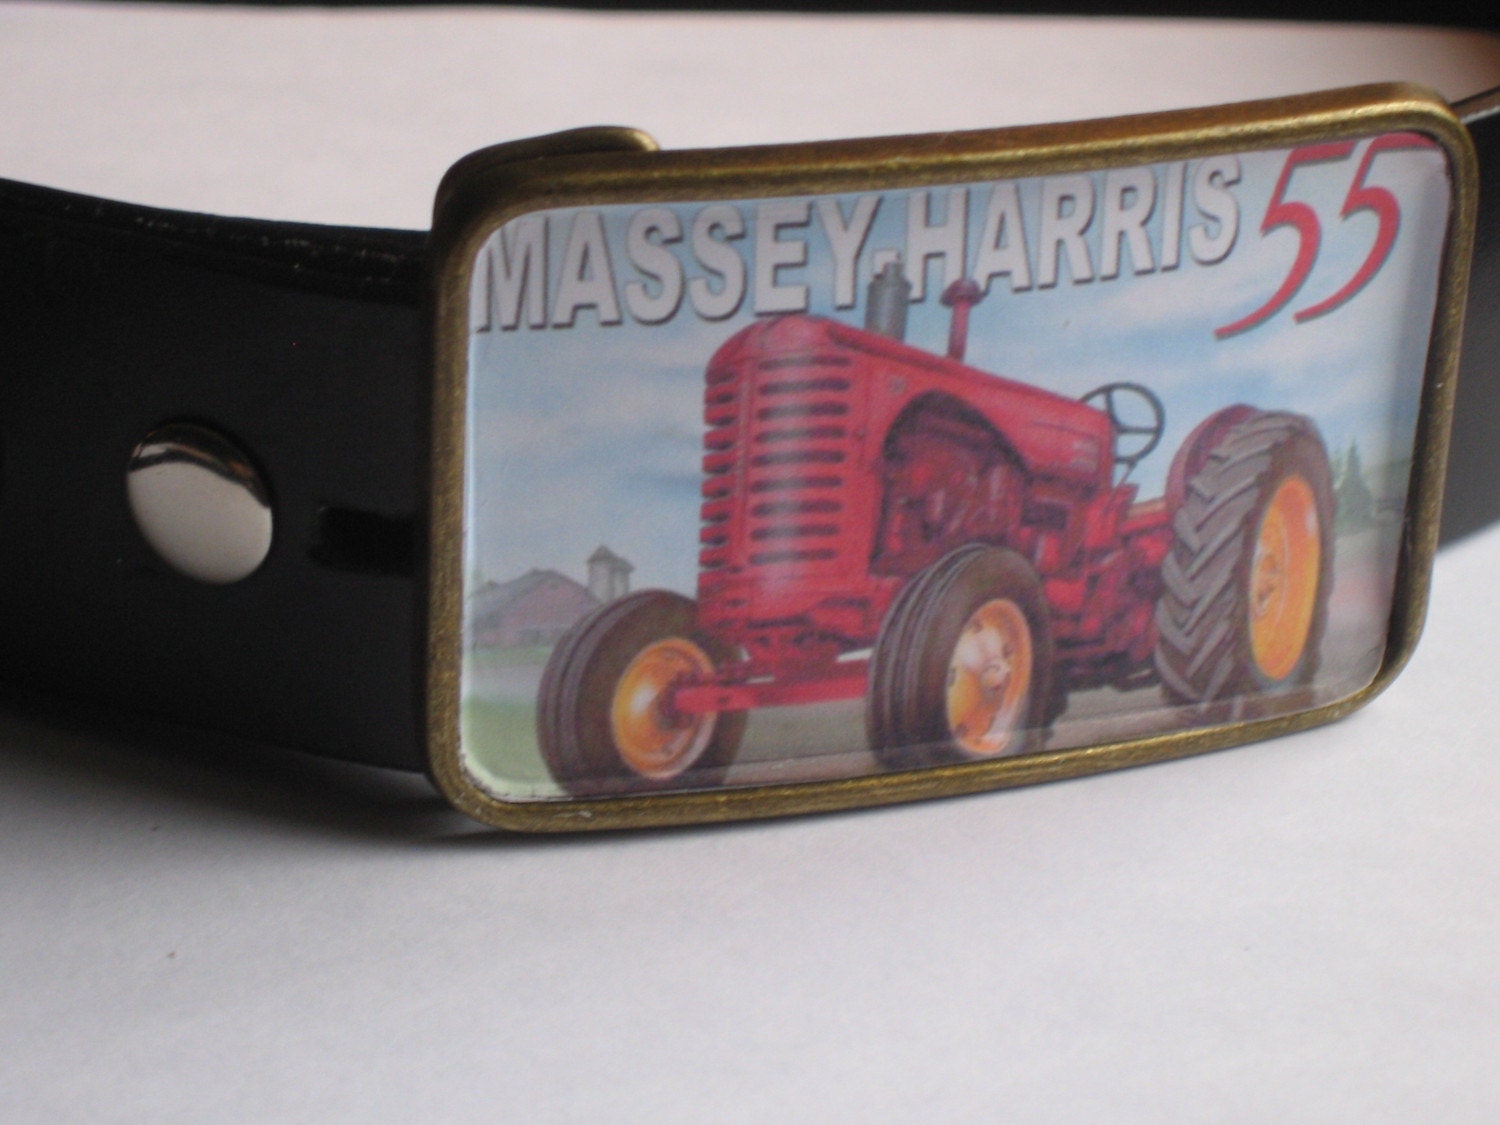 FREE SHIPPING Massey Harris 55 Vinatge Finish Belt Buckle by Jamie Riley Handamade cool travel gift BUCKLE WILL BE COMPLETED WITH GLASS RESIN ONCE ORDER IS FINAL GIFT WRAP INCLUDED  and FREE SHIPPING Tractor Farm